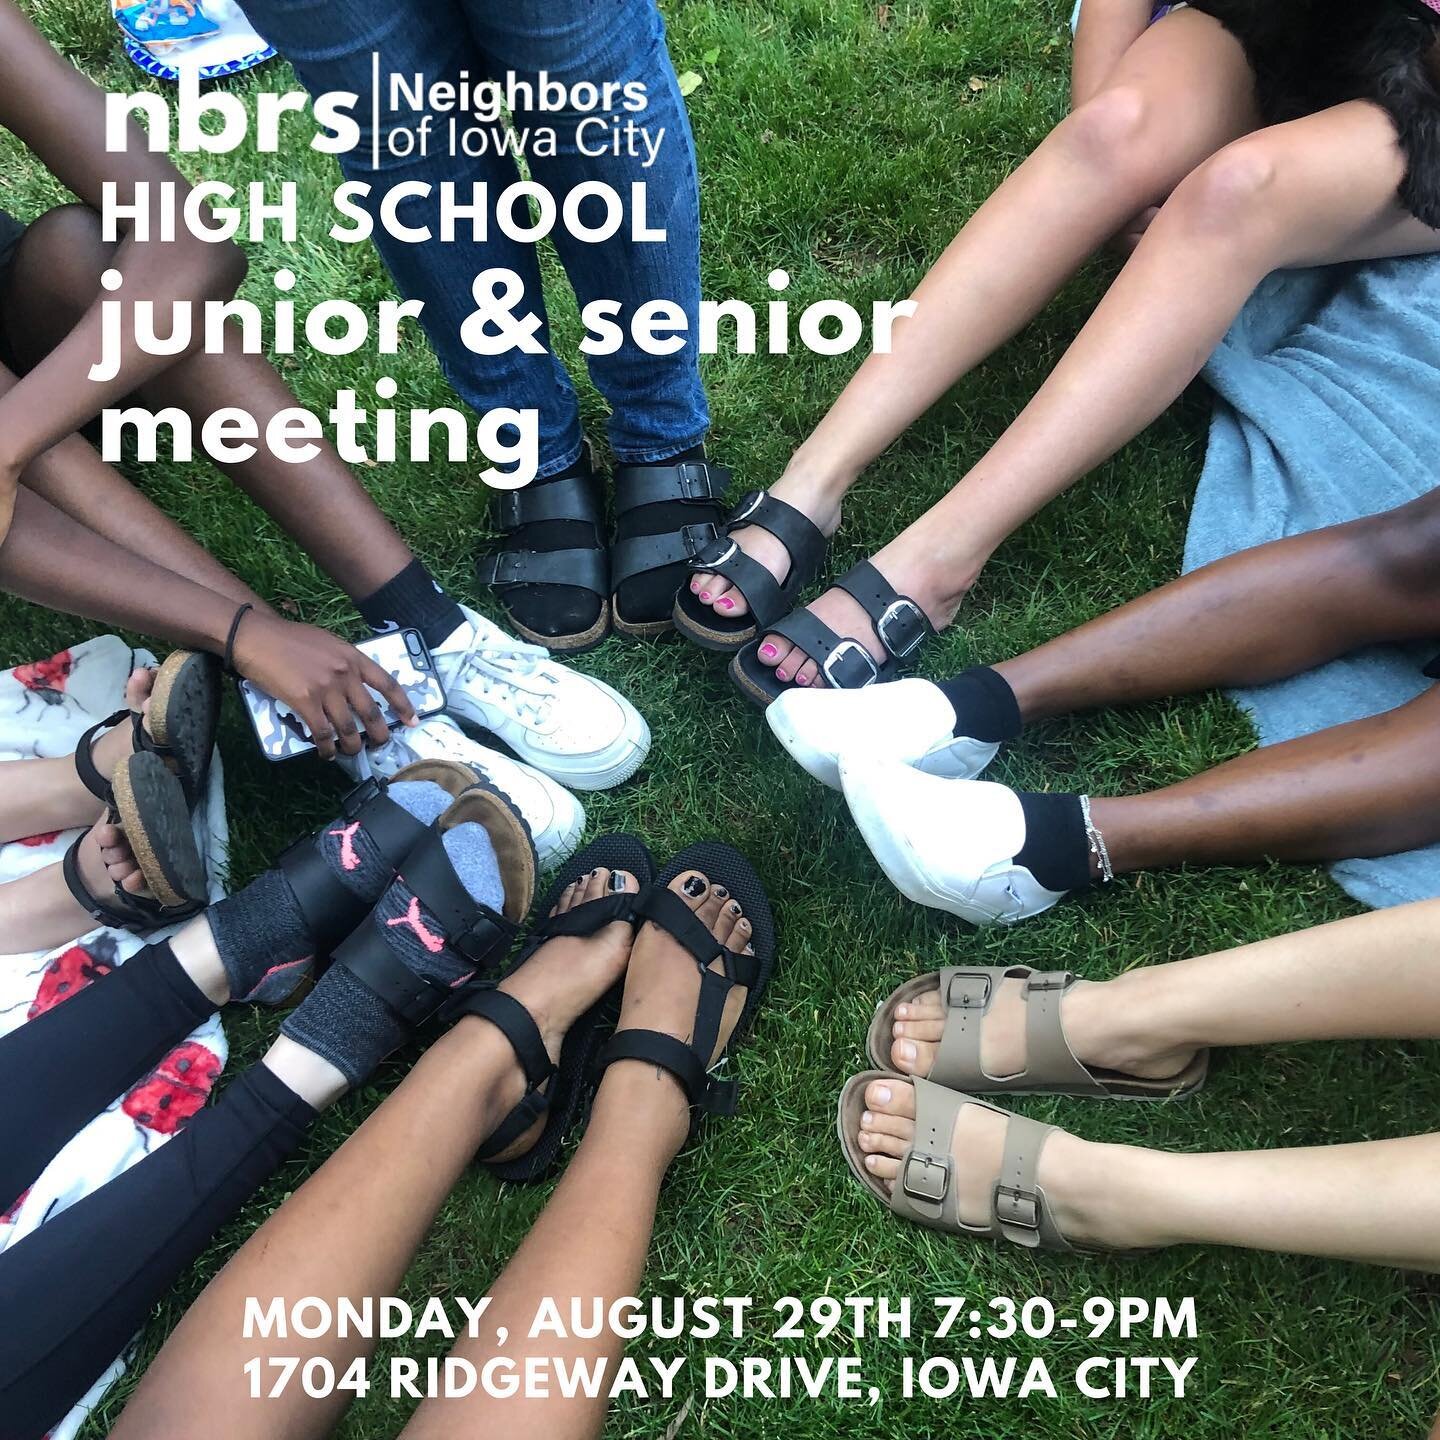 High school juniors and seniors, you&rsquo;re invited to come hang out with the mentors tonight as we make plans for Neighbors! 🎉🎉 Snacks provided. DM us with questions.